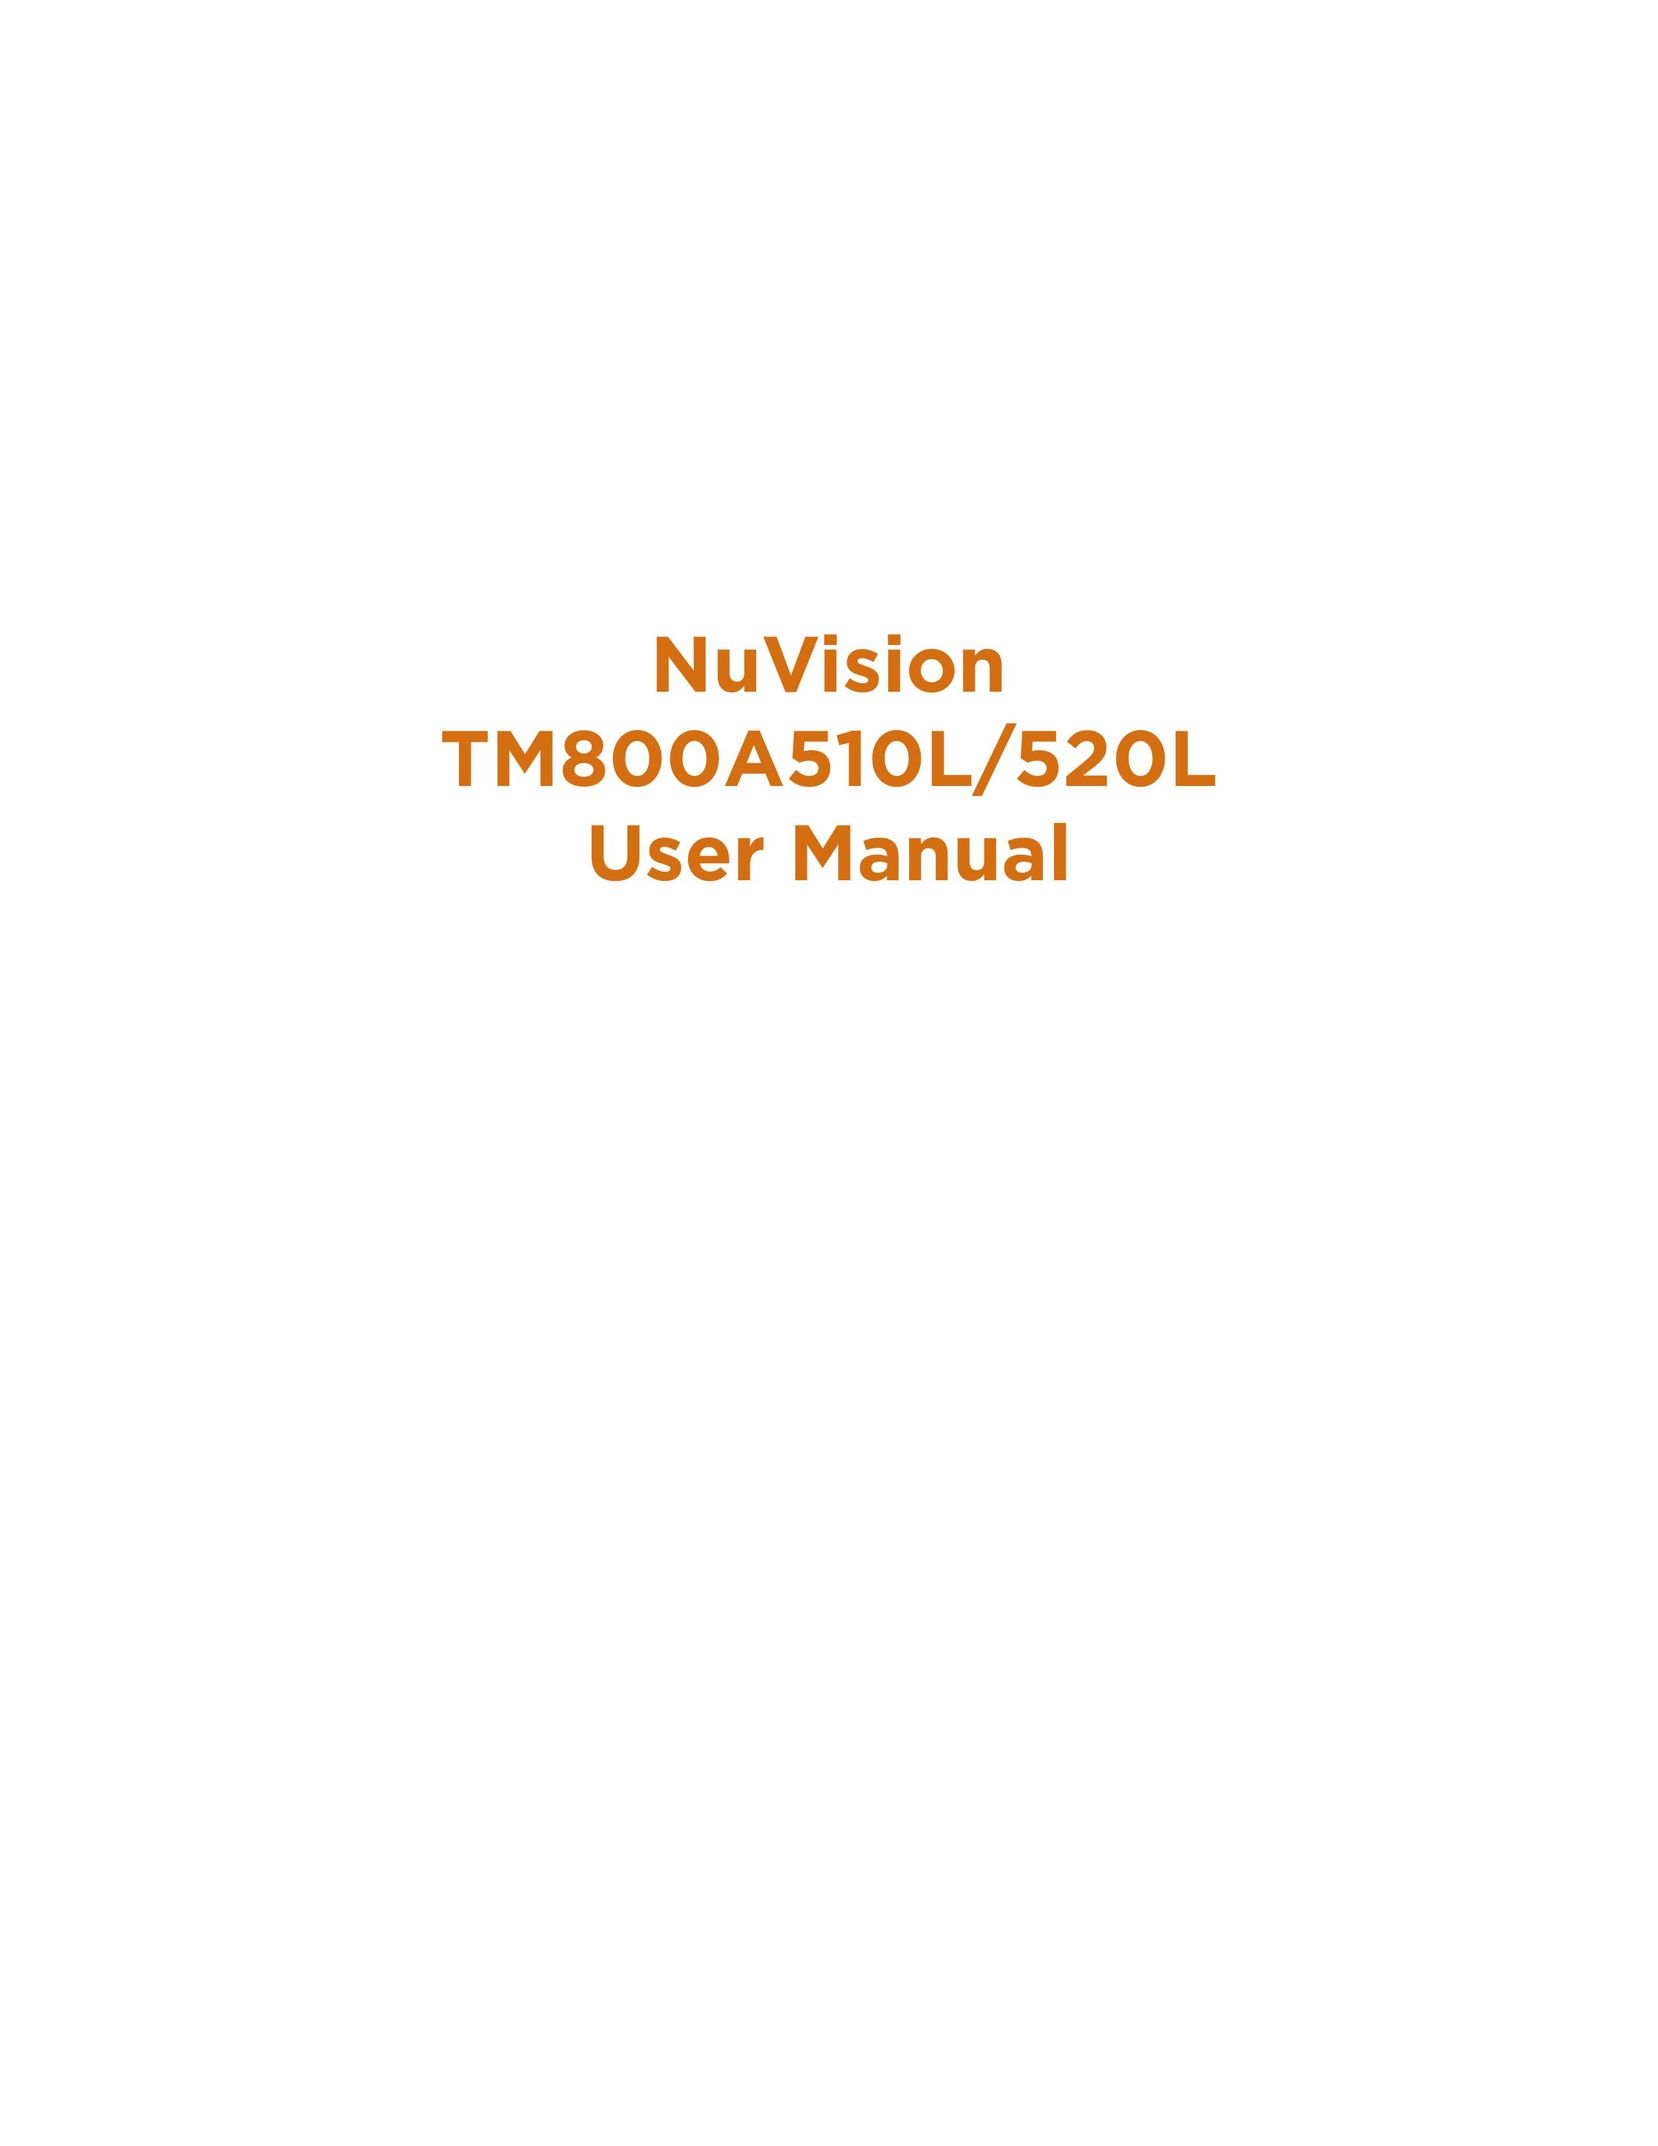 NuVision TM800A520L Graphics Tablet User Manual